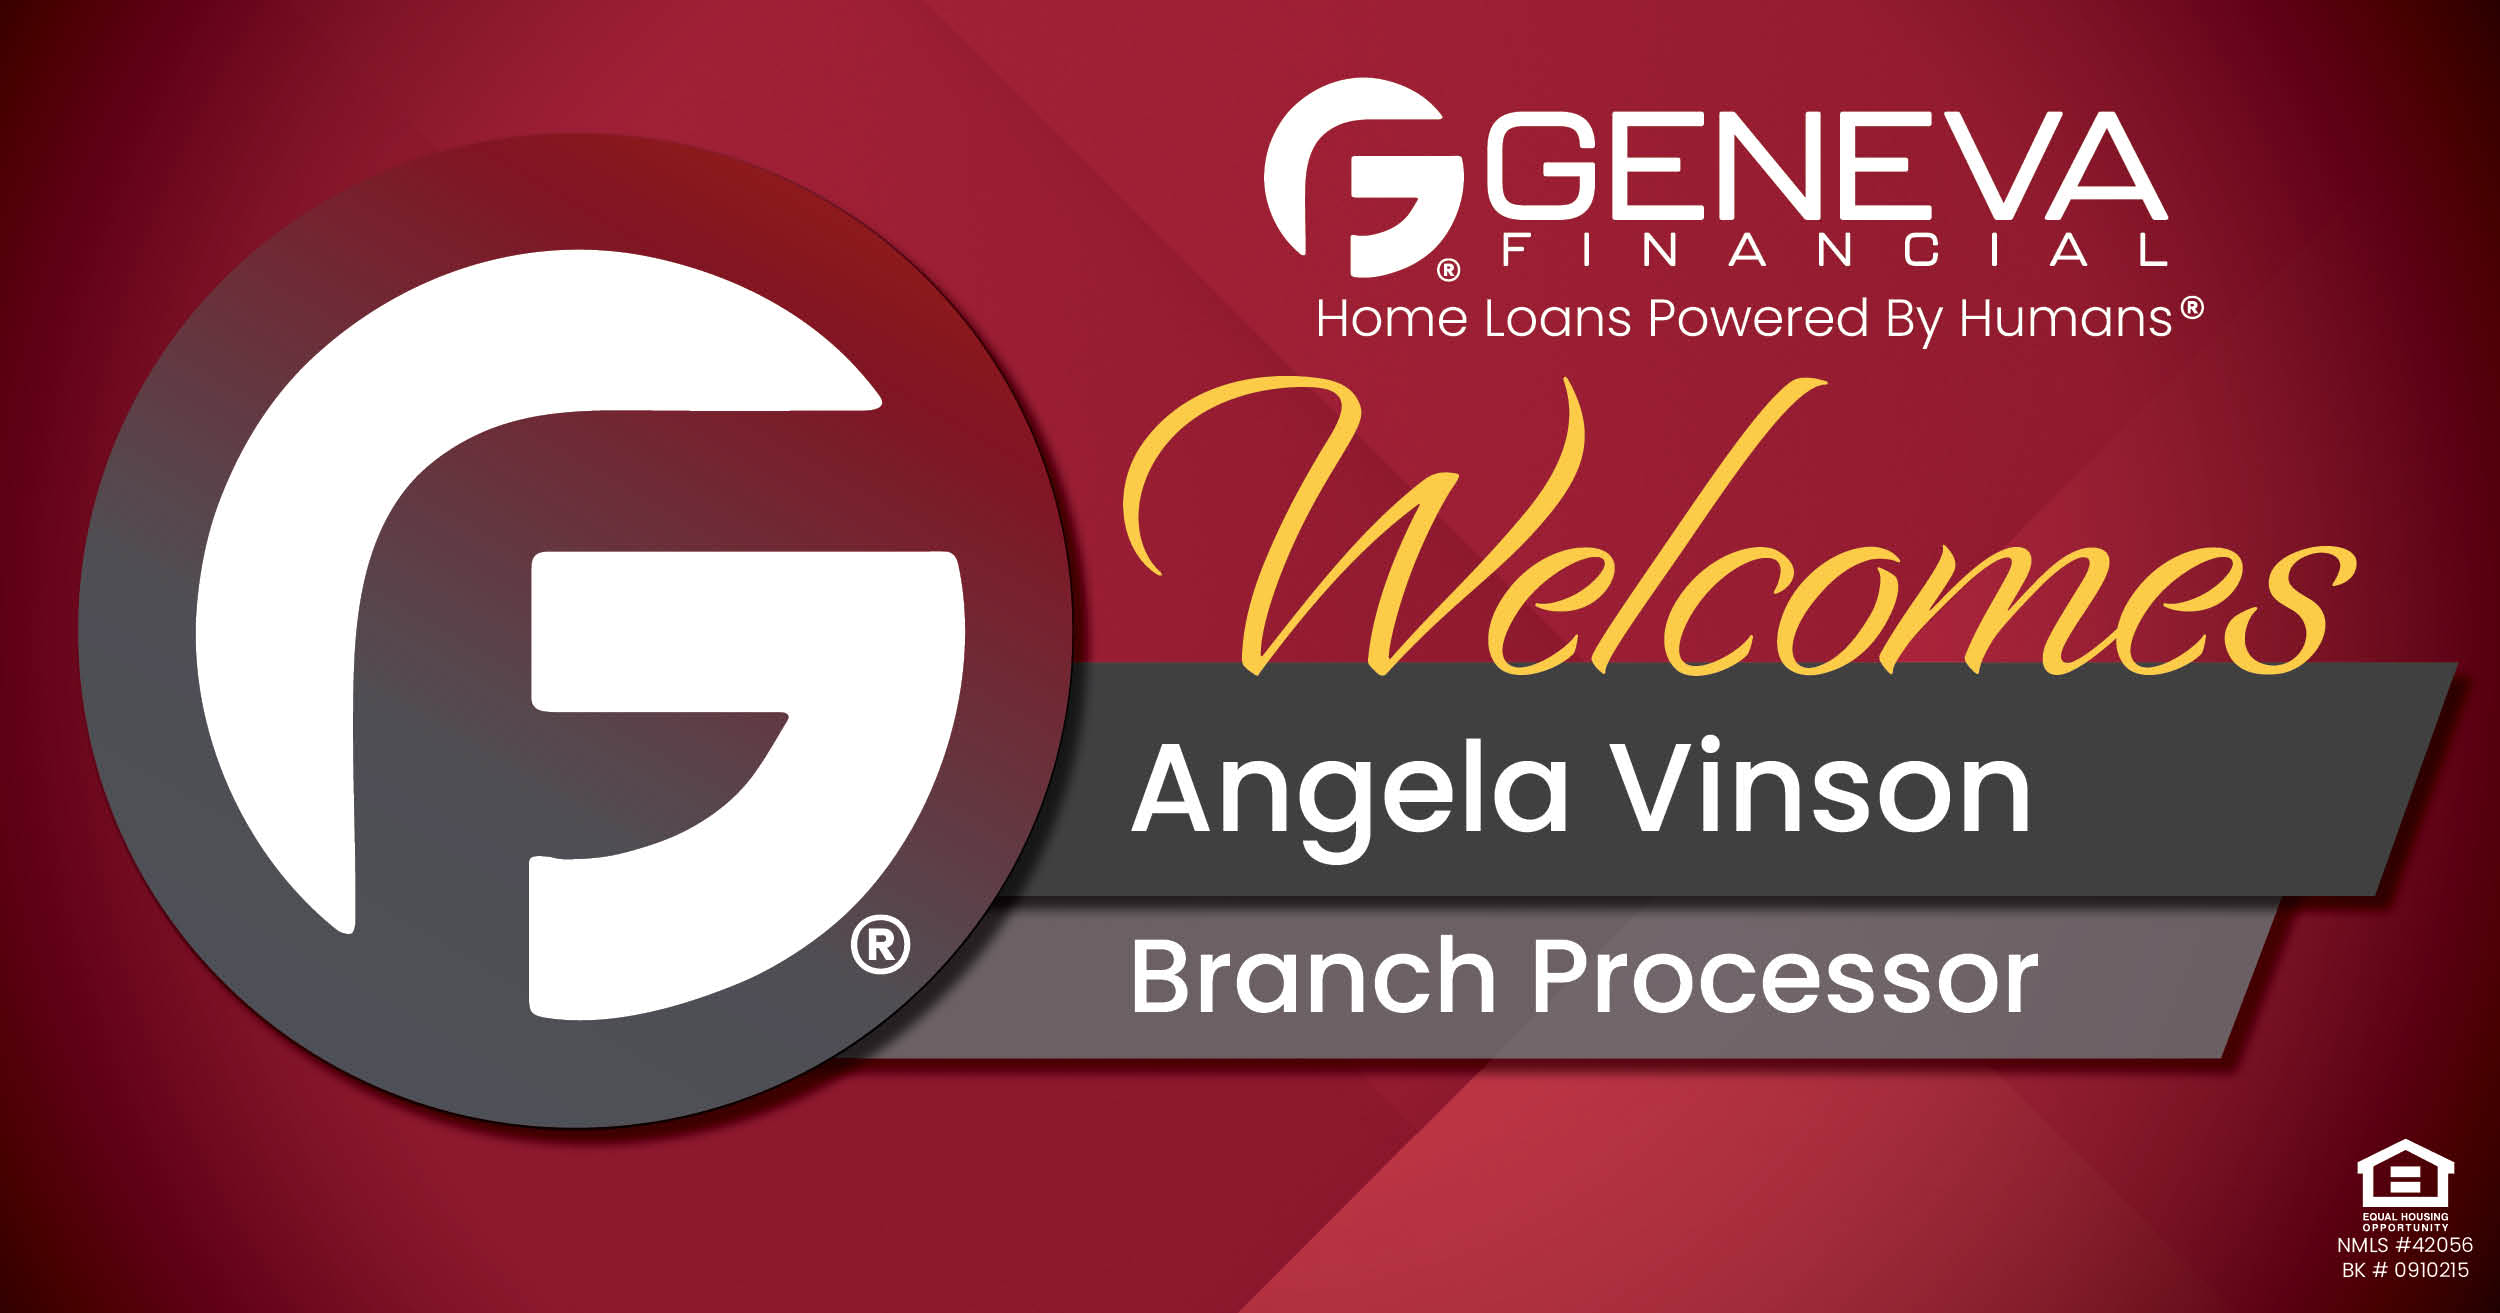 Geneva Financial Welcomes New Processor Angela Vinson to Huntsville, Alabama– Home Loans Powered by Humans®.